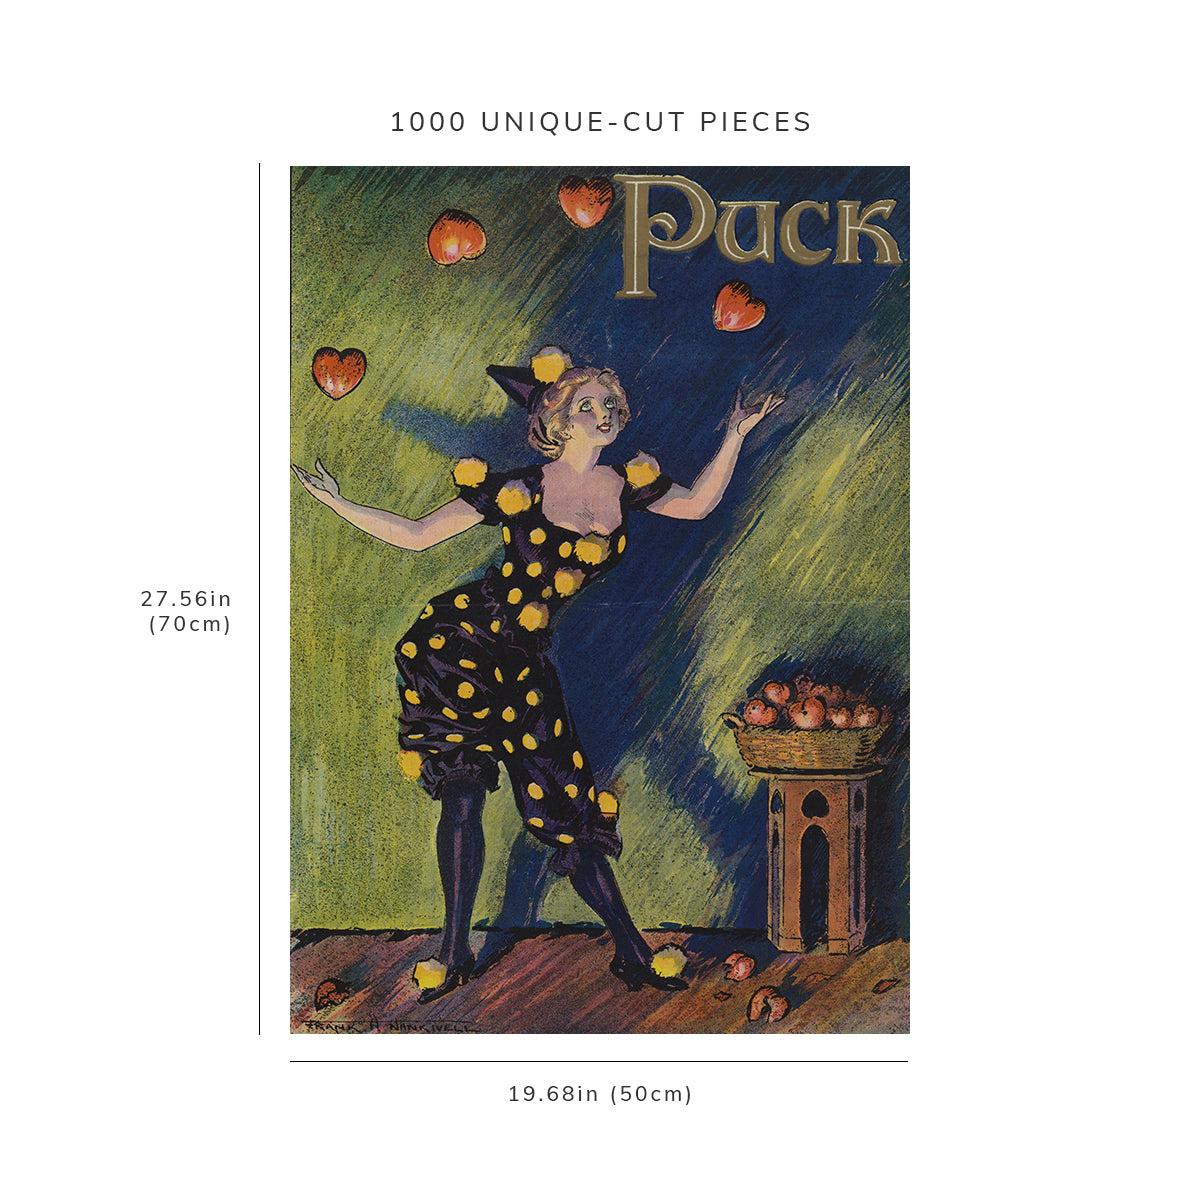 1000 piece puzzle - 1911 | Saint Valentine Number | Puck | young woman juggling hearts